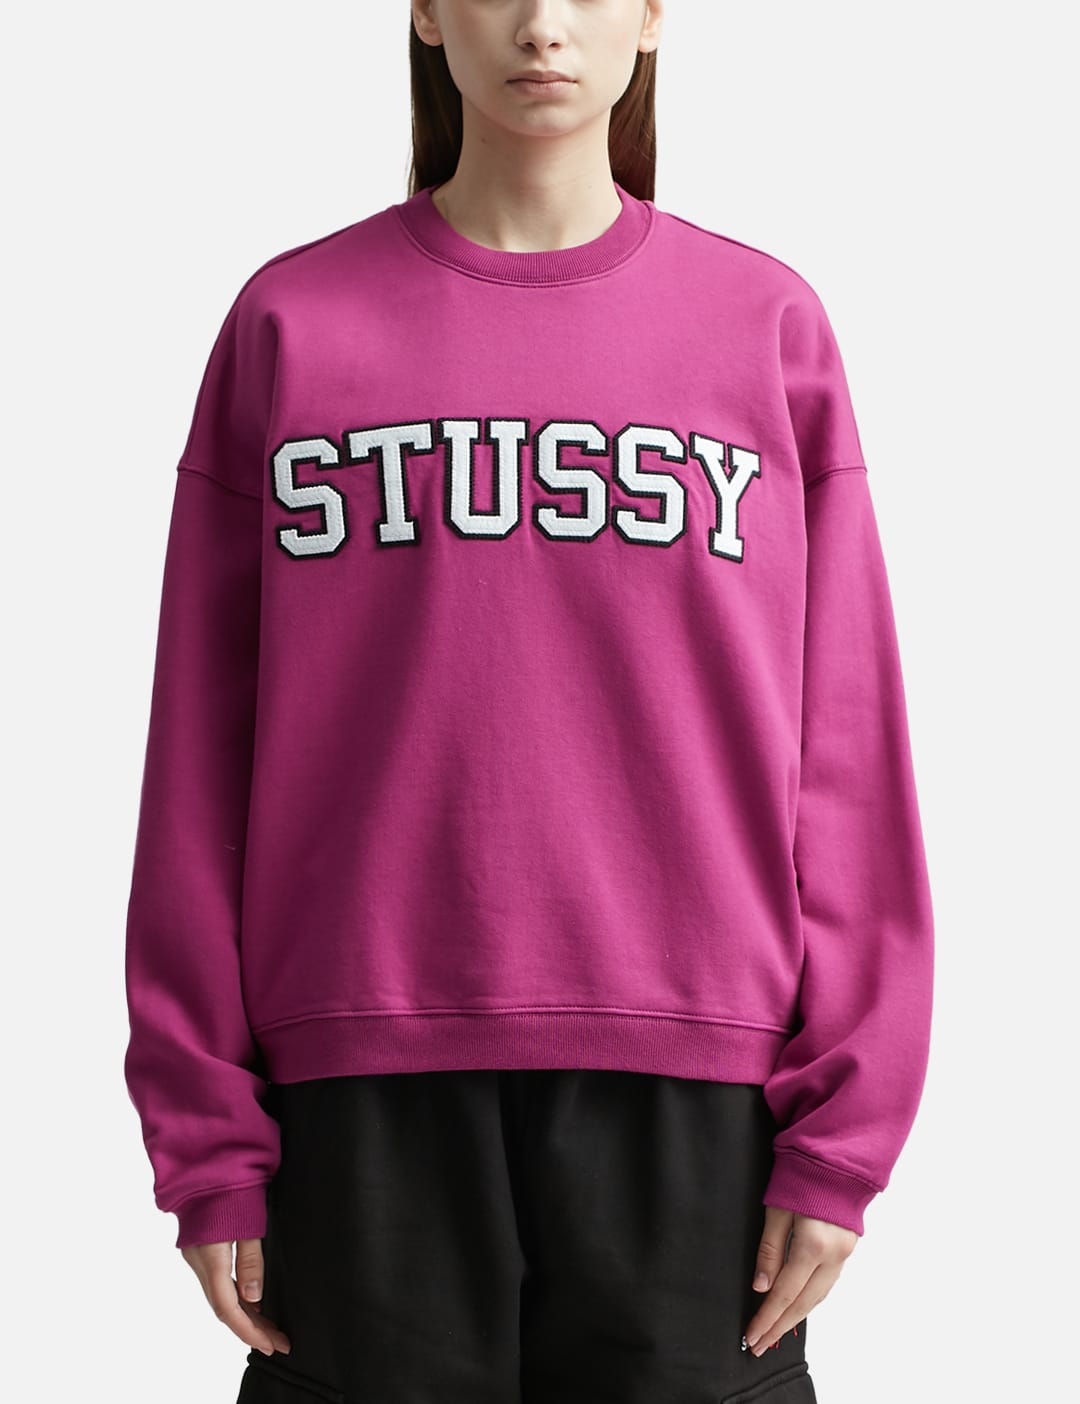 Stüssy - Relaxed Oversized Crewneck | HBX - Globally Curated